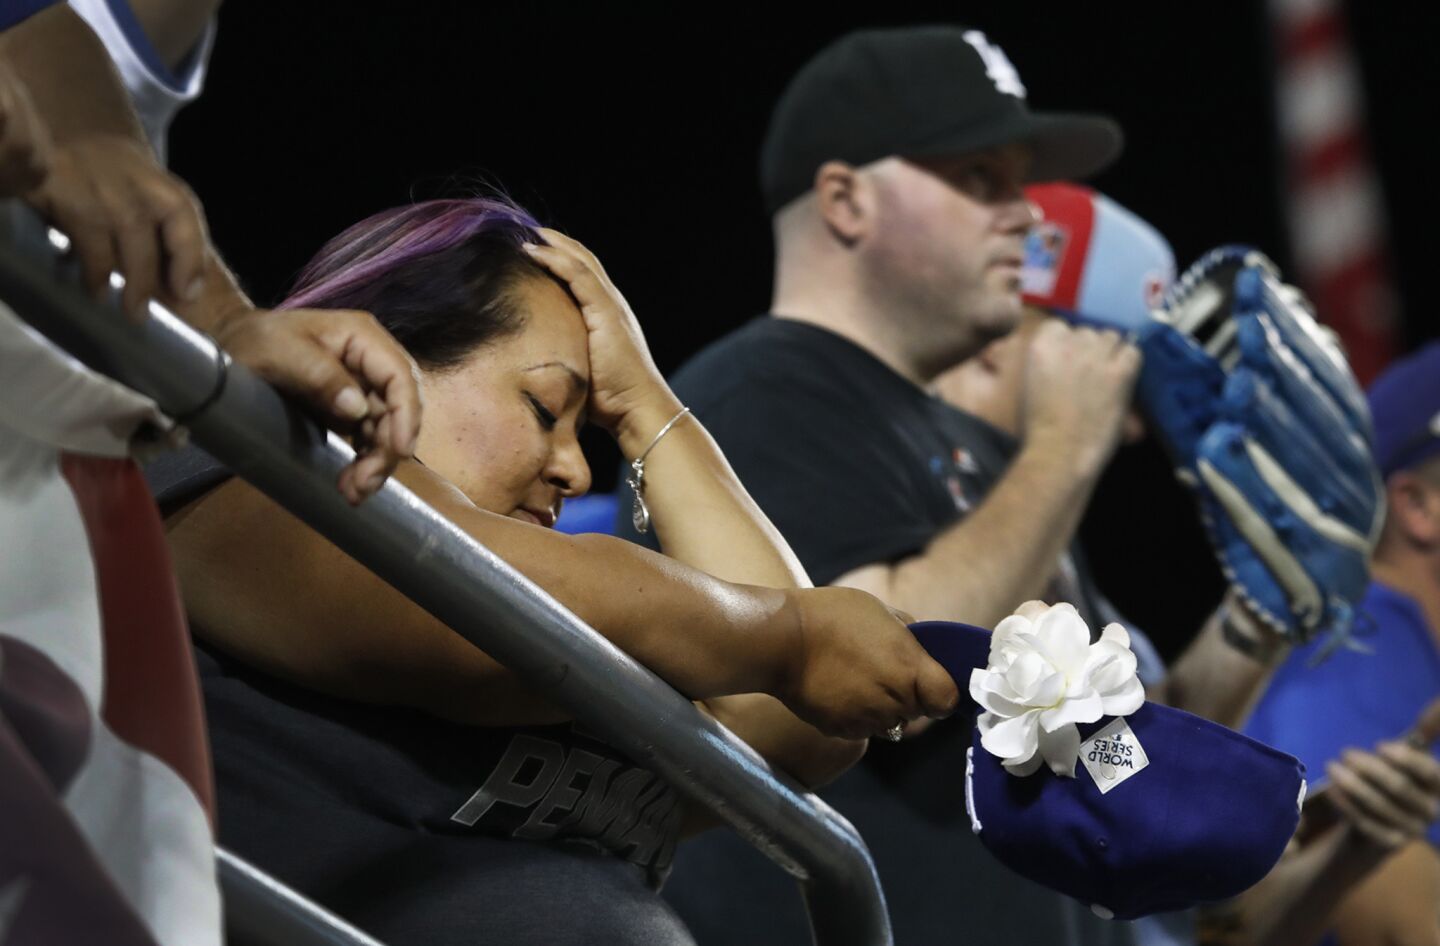 Fans at Dodger Stadium react as Houston wins a Game 2 thriller, 7-6, in 11 innings.